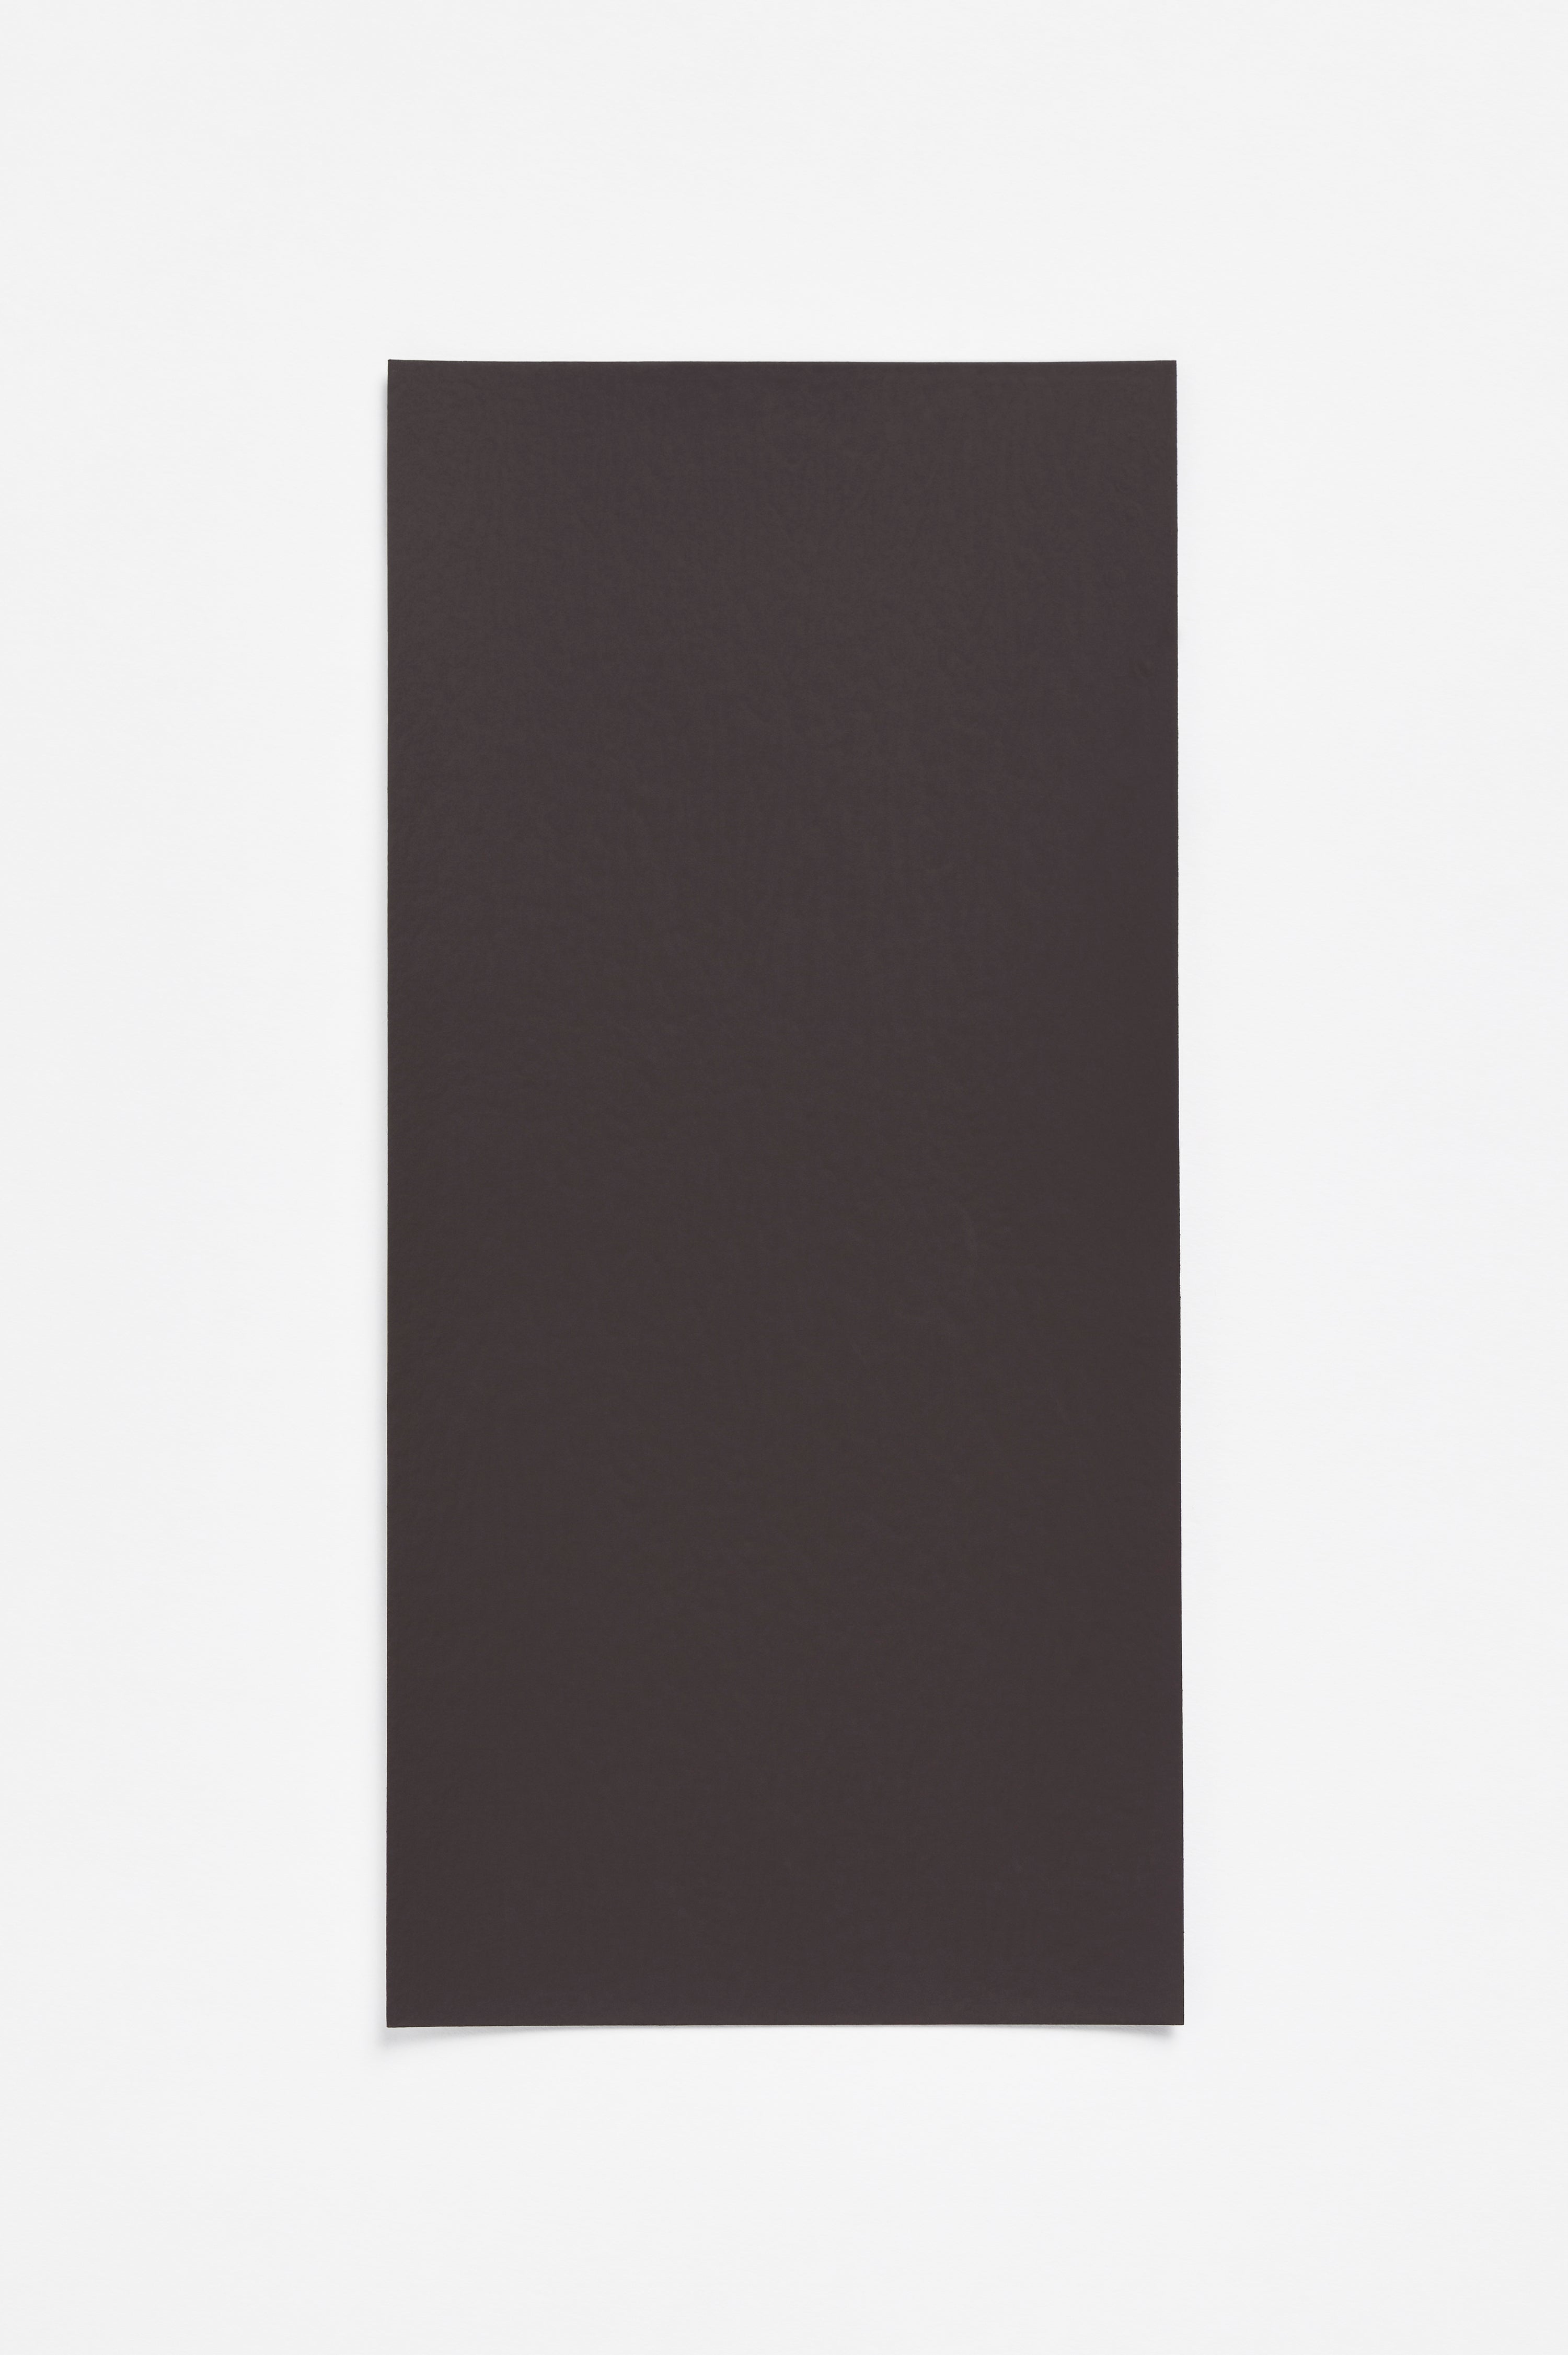 Berlin — a paint colour developed by David Chipperfield for Blēo